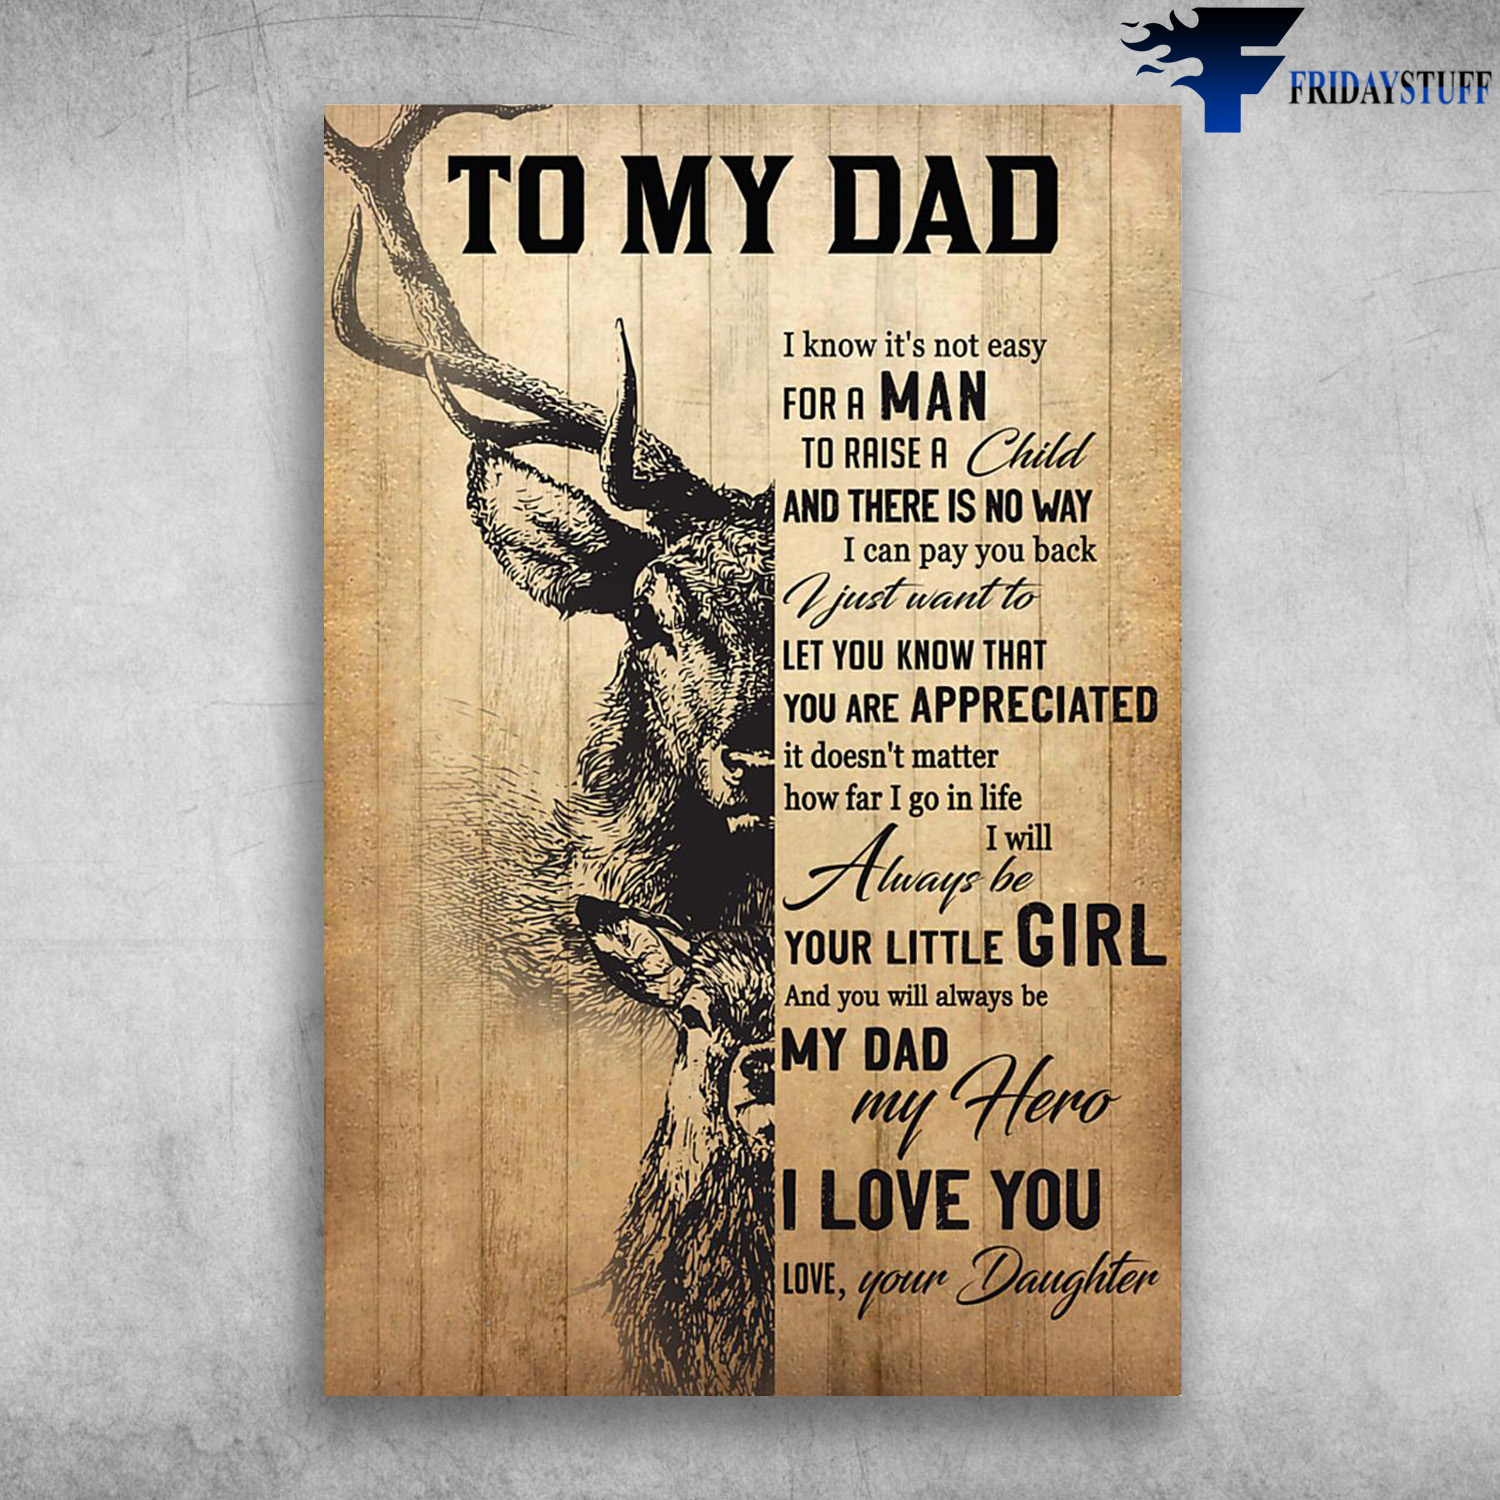 Hunting Dad Deer - To My Dad, I Know It's Not Easy For A Man, To Raise A Child And There Is No Way, I Can Pay You Back, I Just Want To Let You Know That You Are Appreciated, It Doesn't Matter How Far I Go In Life, I Will Always Be Your Little Girl